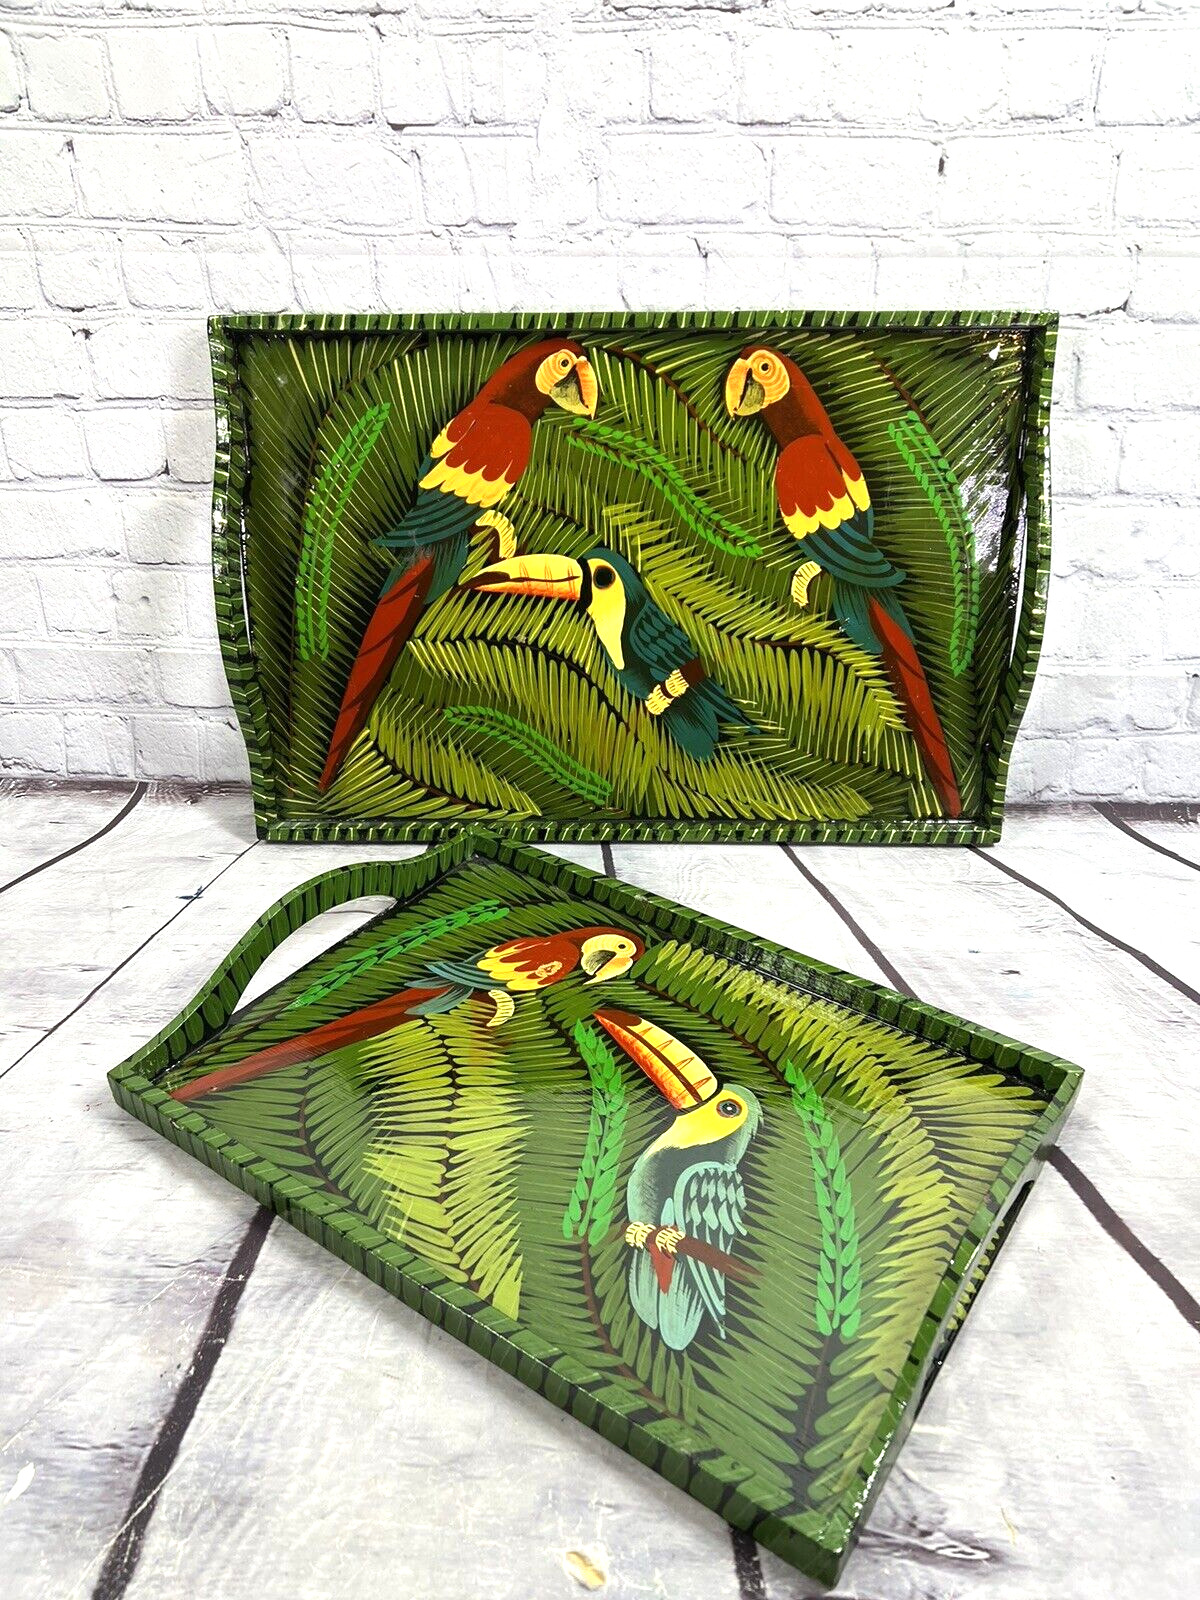 Vtg set of 2 Wood Serving Tray Hand Painted Parrot Macaw Folk Art Colorful Tiki